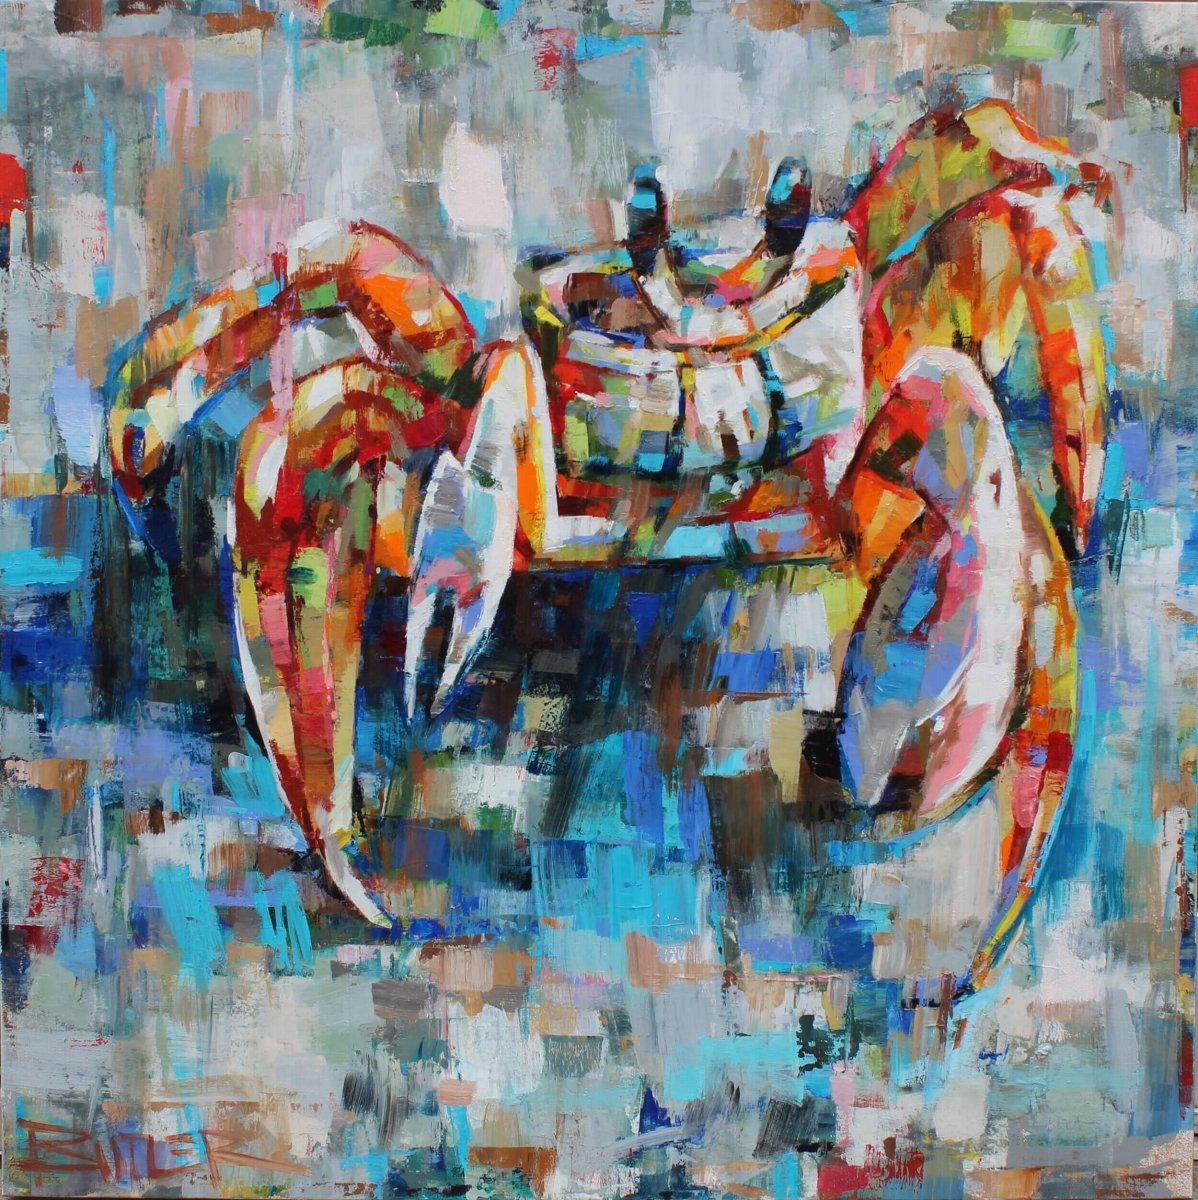 Crabby Life by Curt Butler at LePrince Galleries